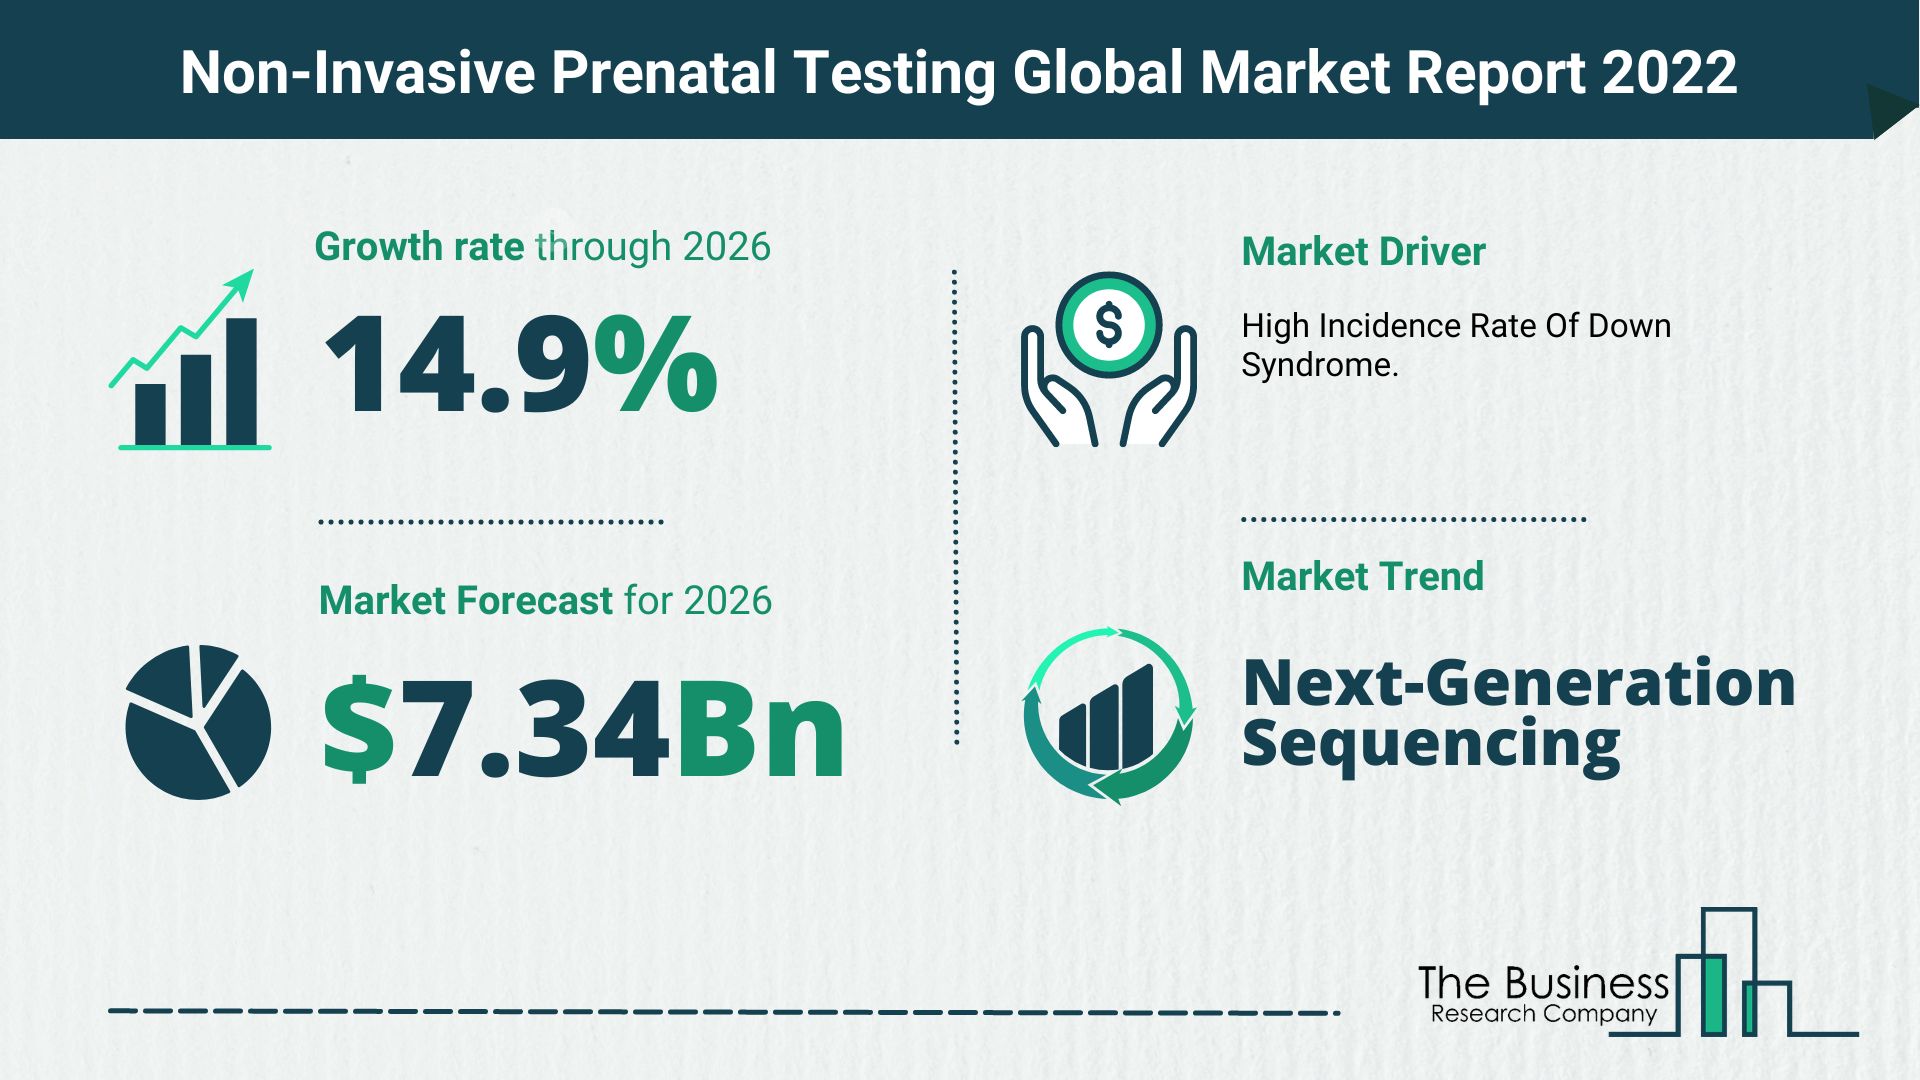 Latest Non-invasive Prenatal Testing Market Growth Study 2022-2026 By The Business Research Company